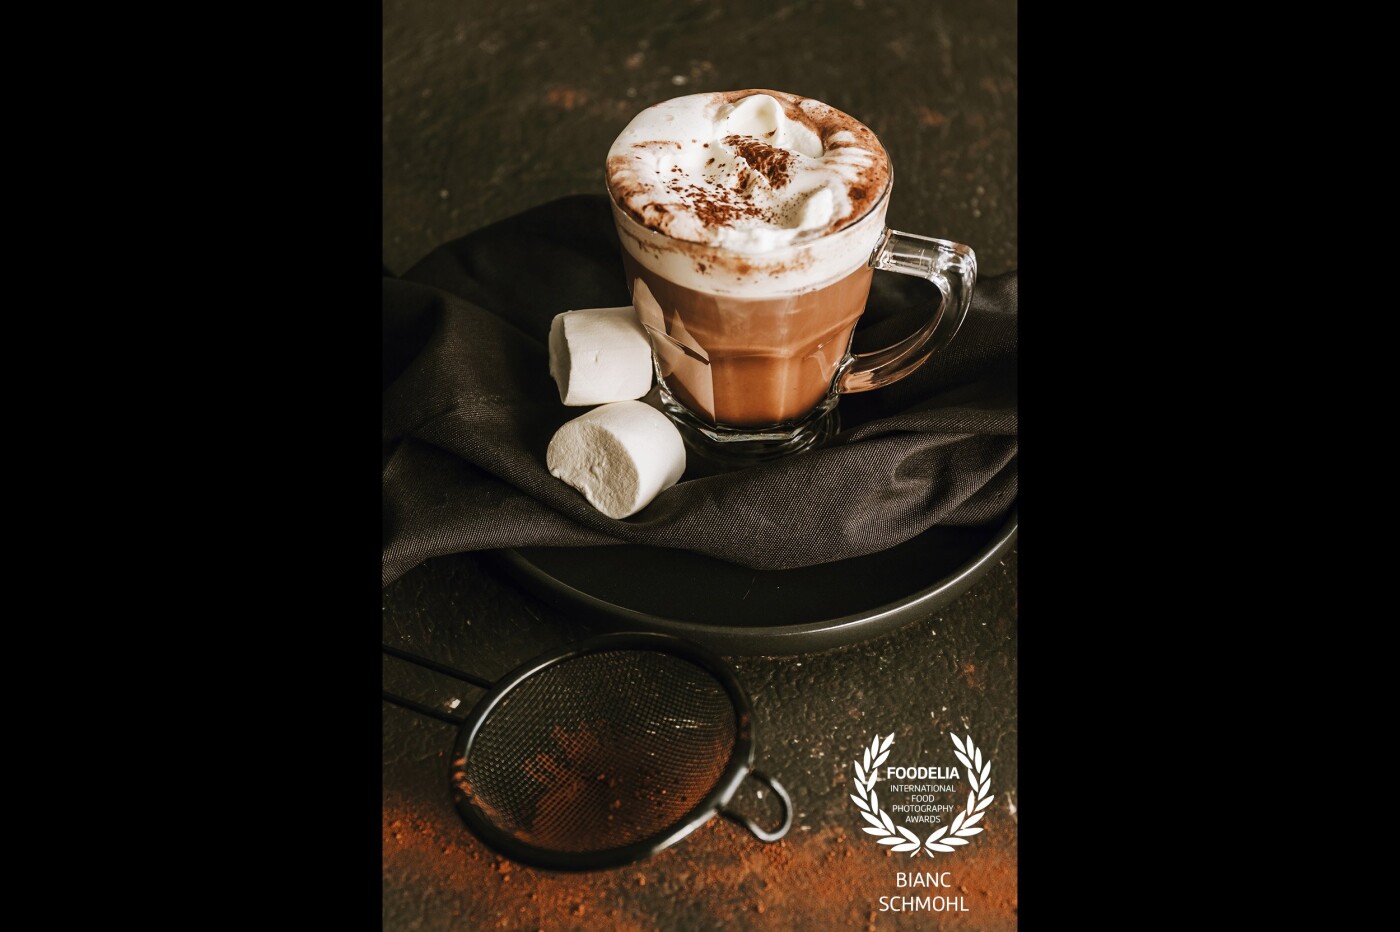 The ultimate autumn and winter drink, hot chocolate with whipped cream and marshmallows. To keep you warm on cold winter days. Dark and moody shot, love that style.